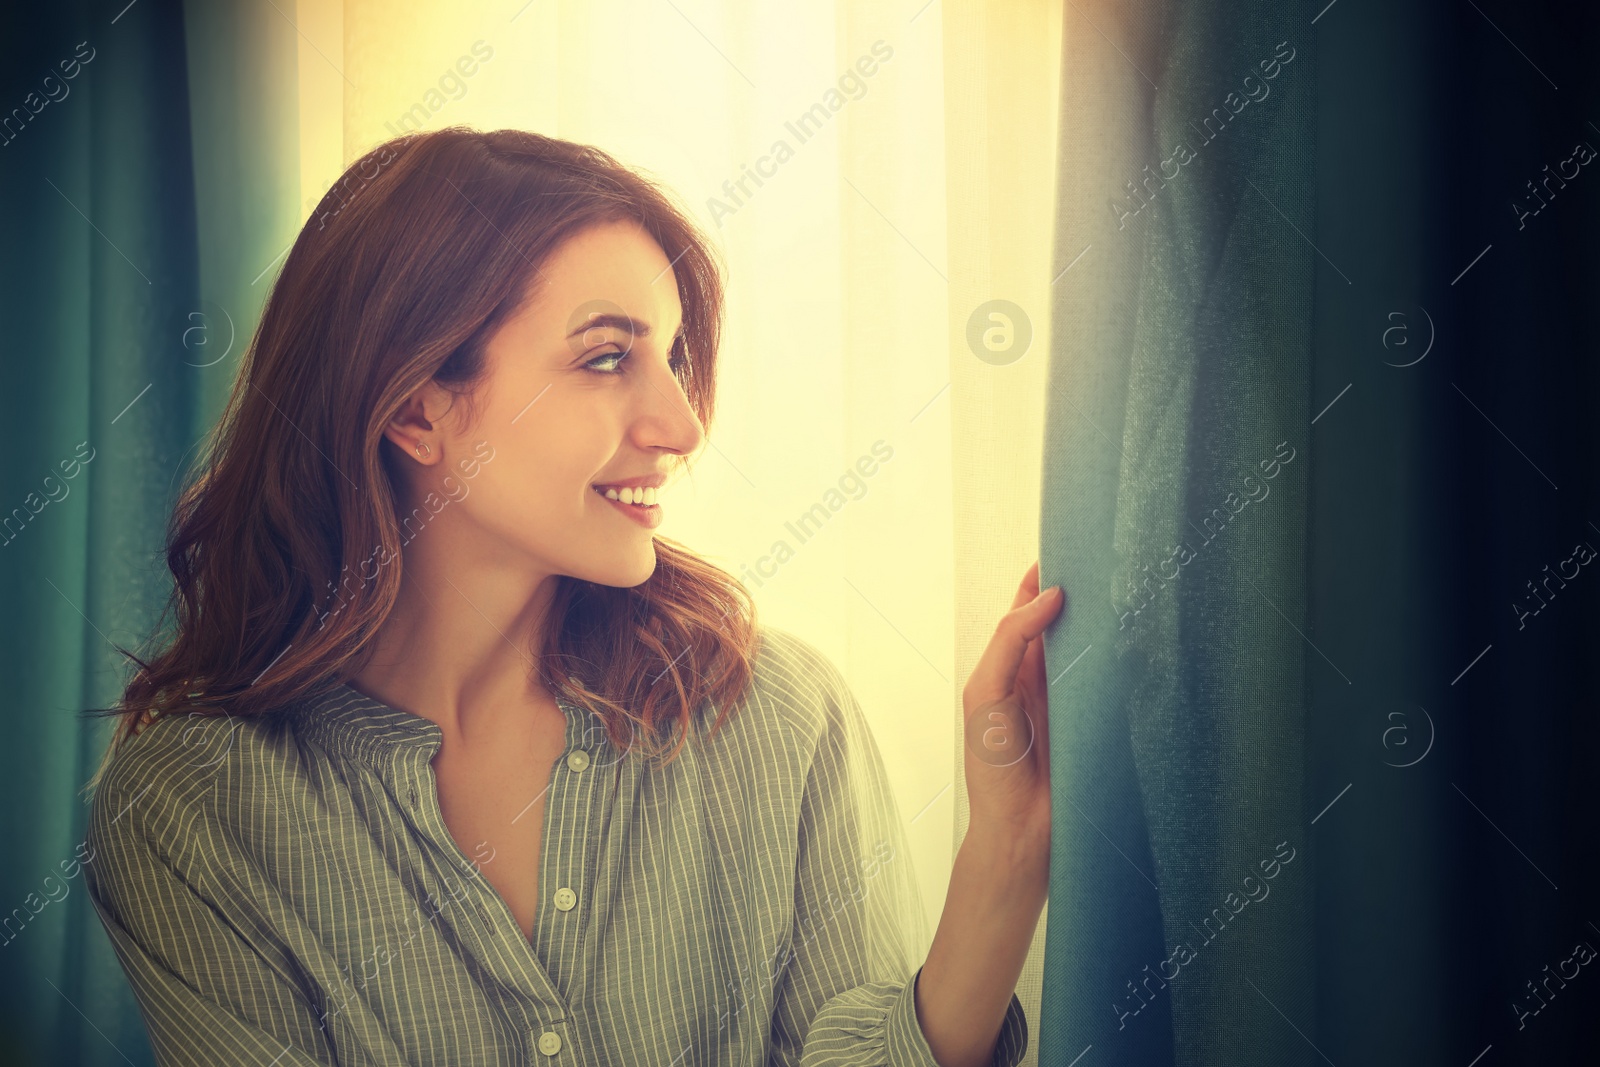 Image of Happy woman opening window curtains at home